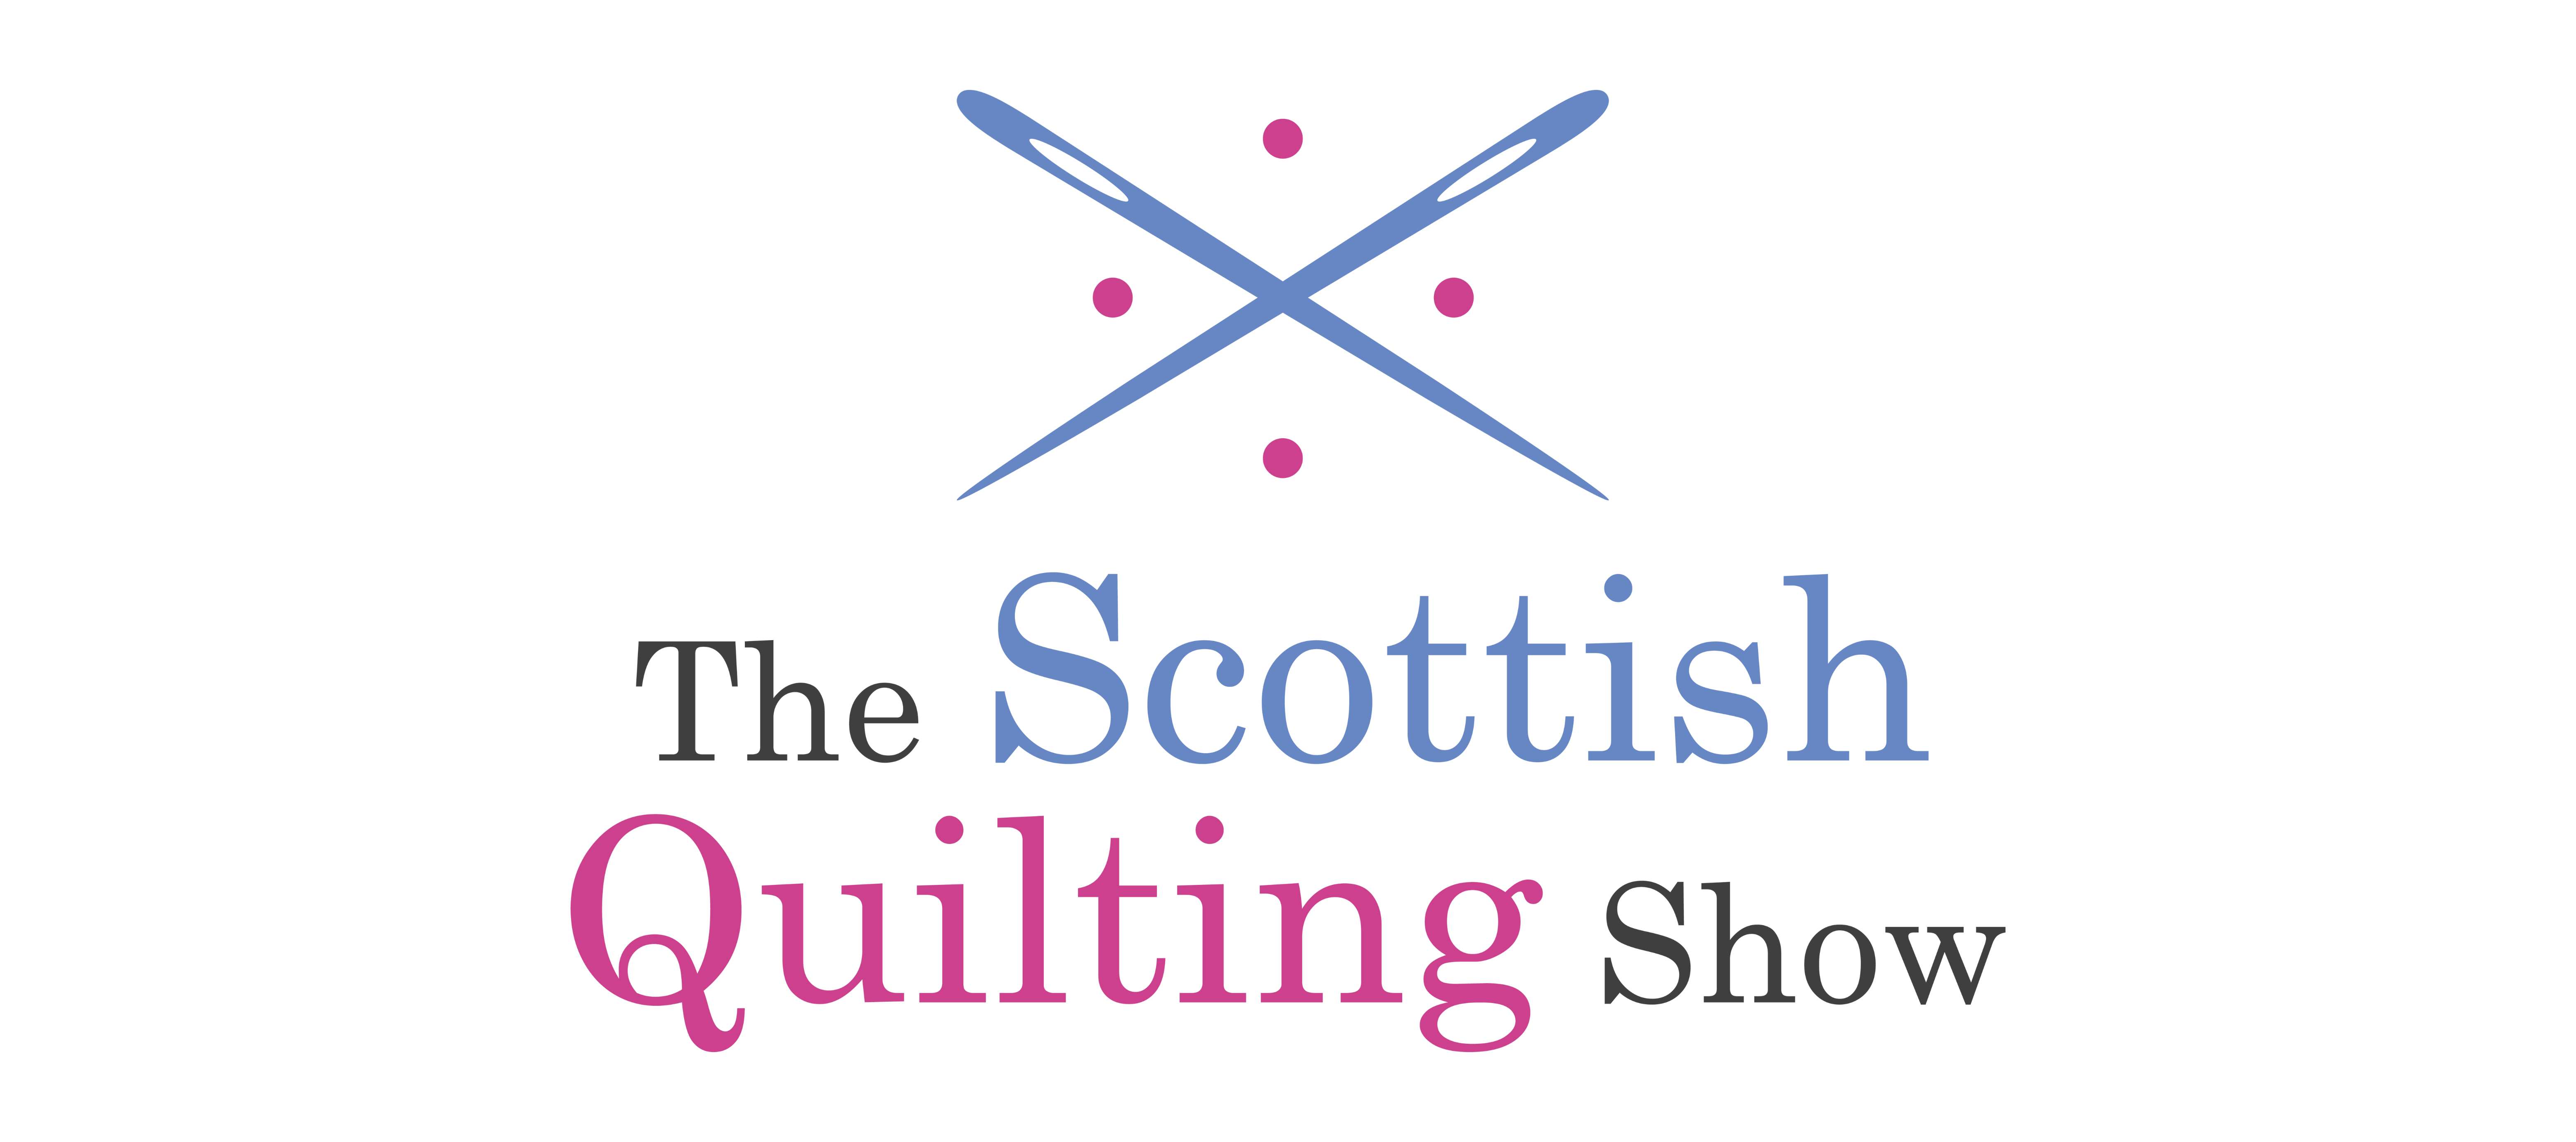 The Scottish Quilting Show